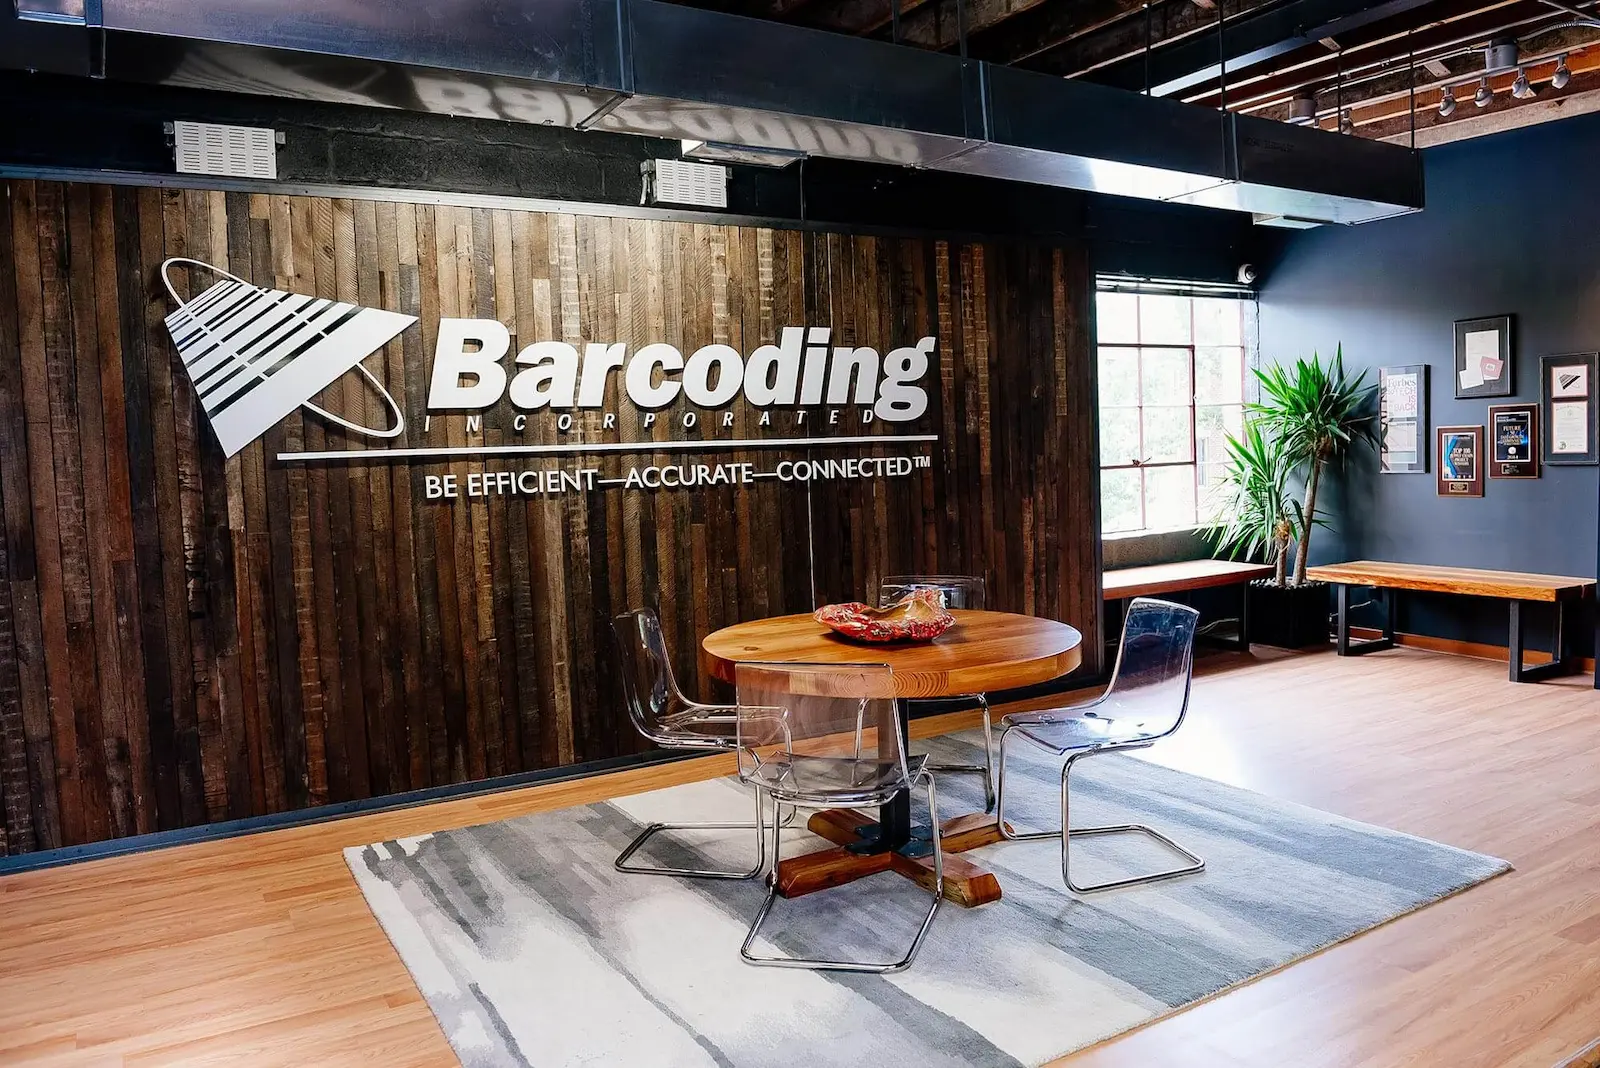 Better Together: Our Relationship with Barcoding, Inc.